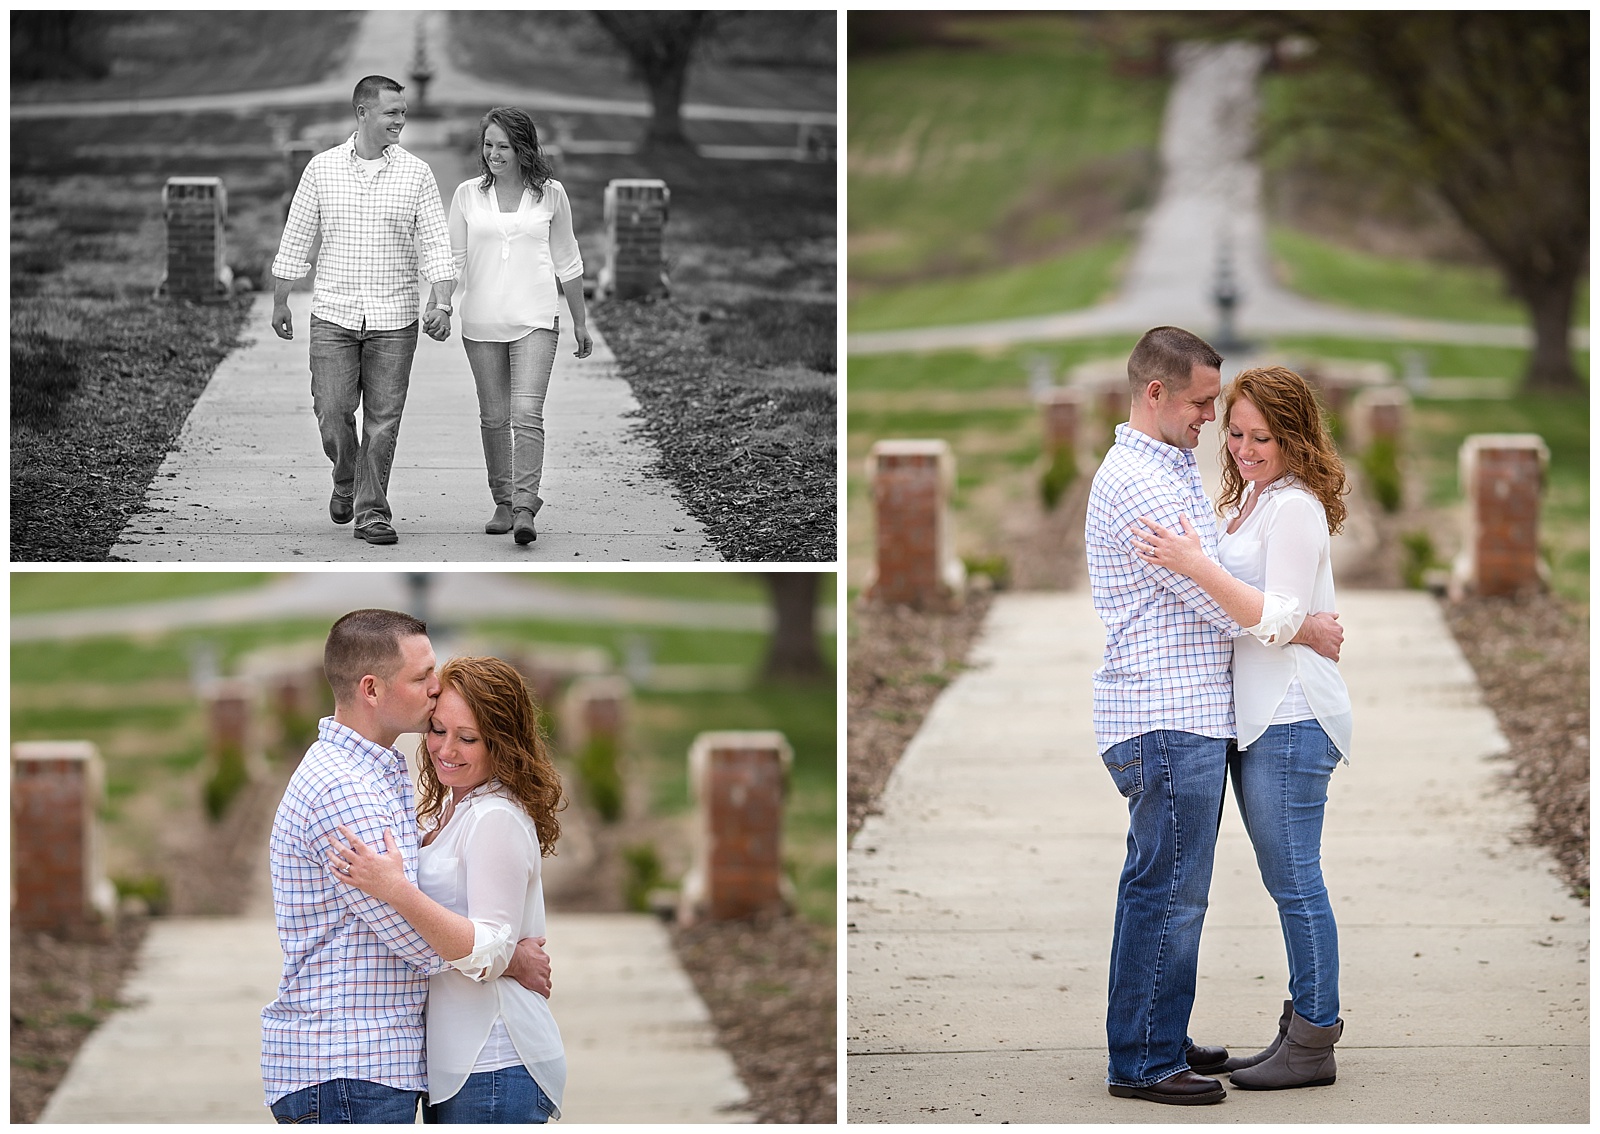 An engagement session at Belvoir Winery in Liberty, Missouri.